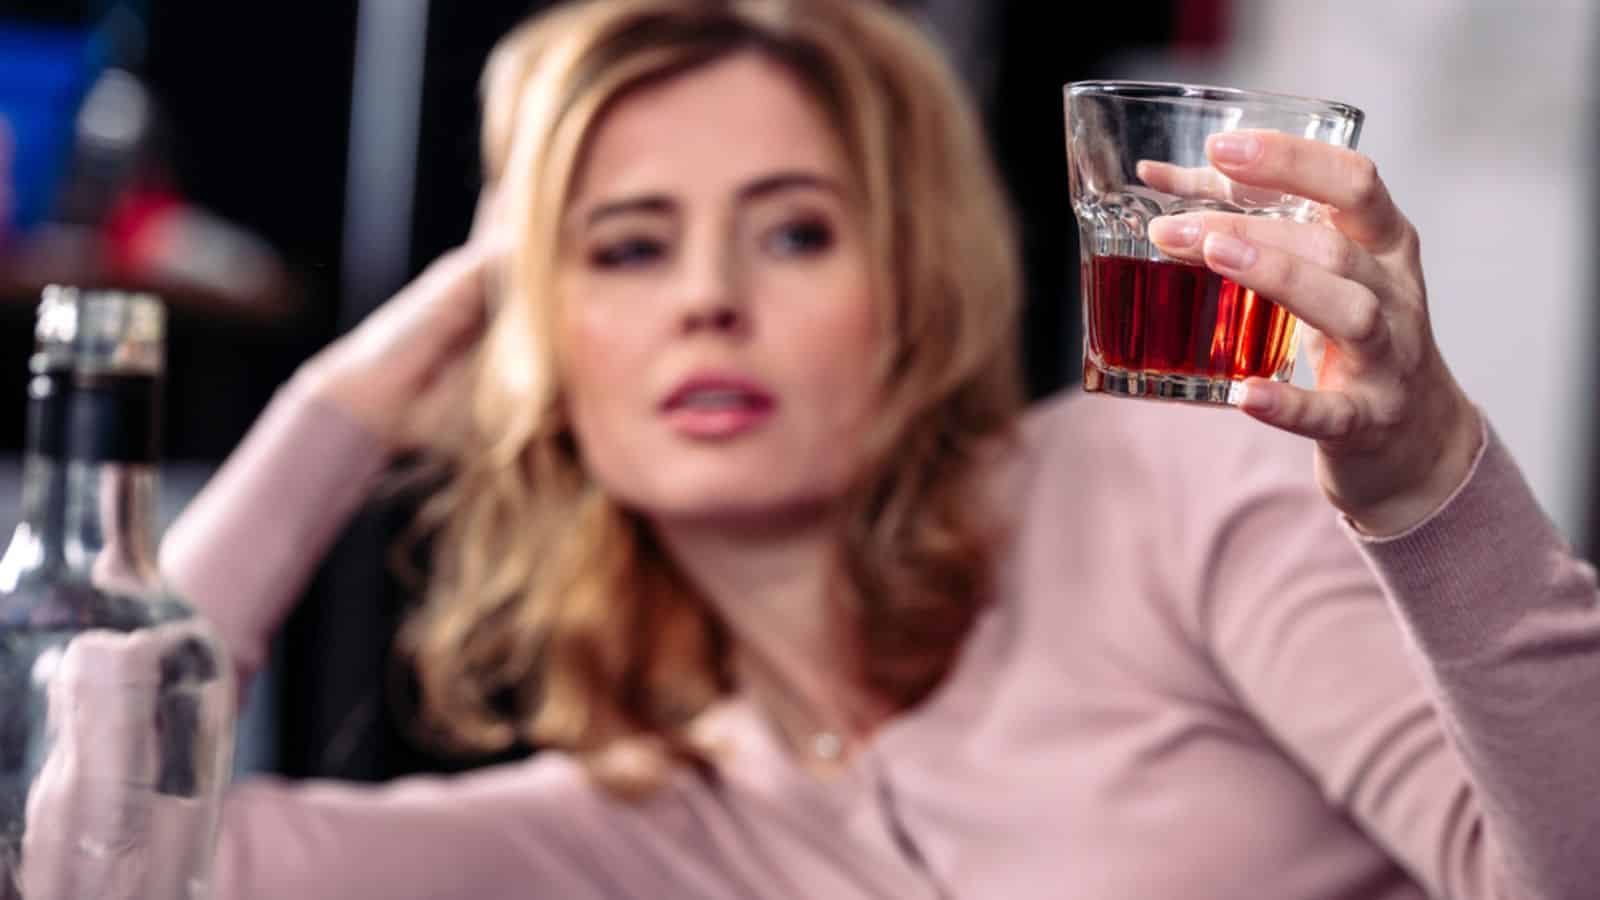 Selective focus of woman looking at glass of alcohol in hand